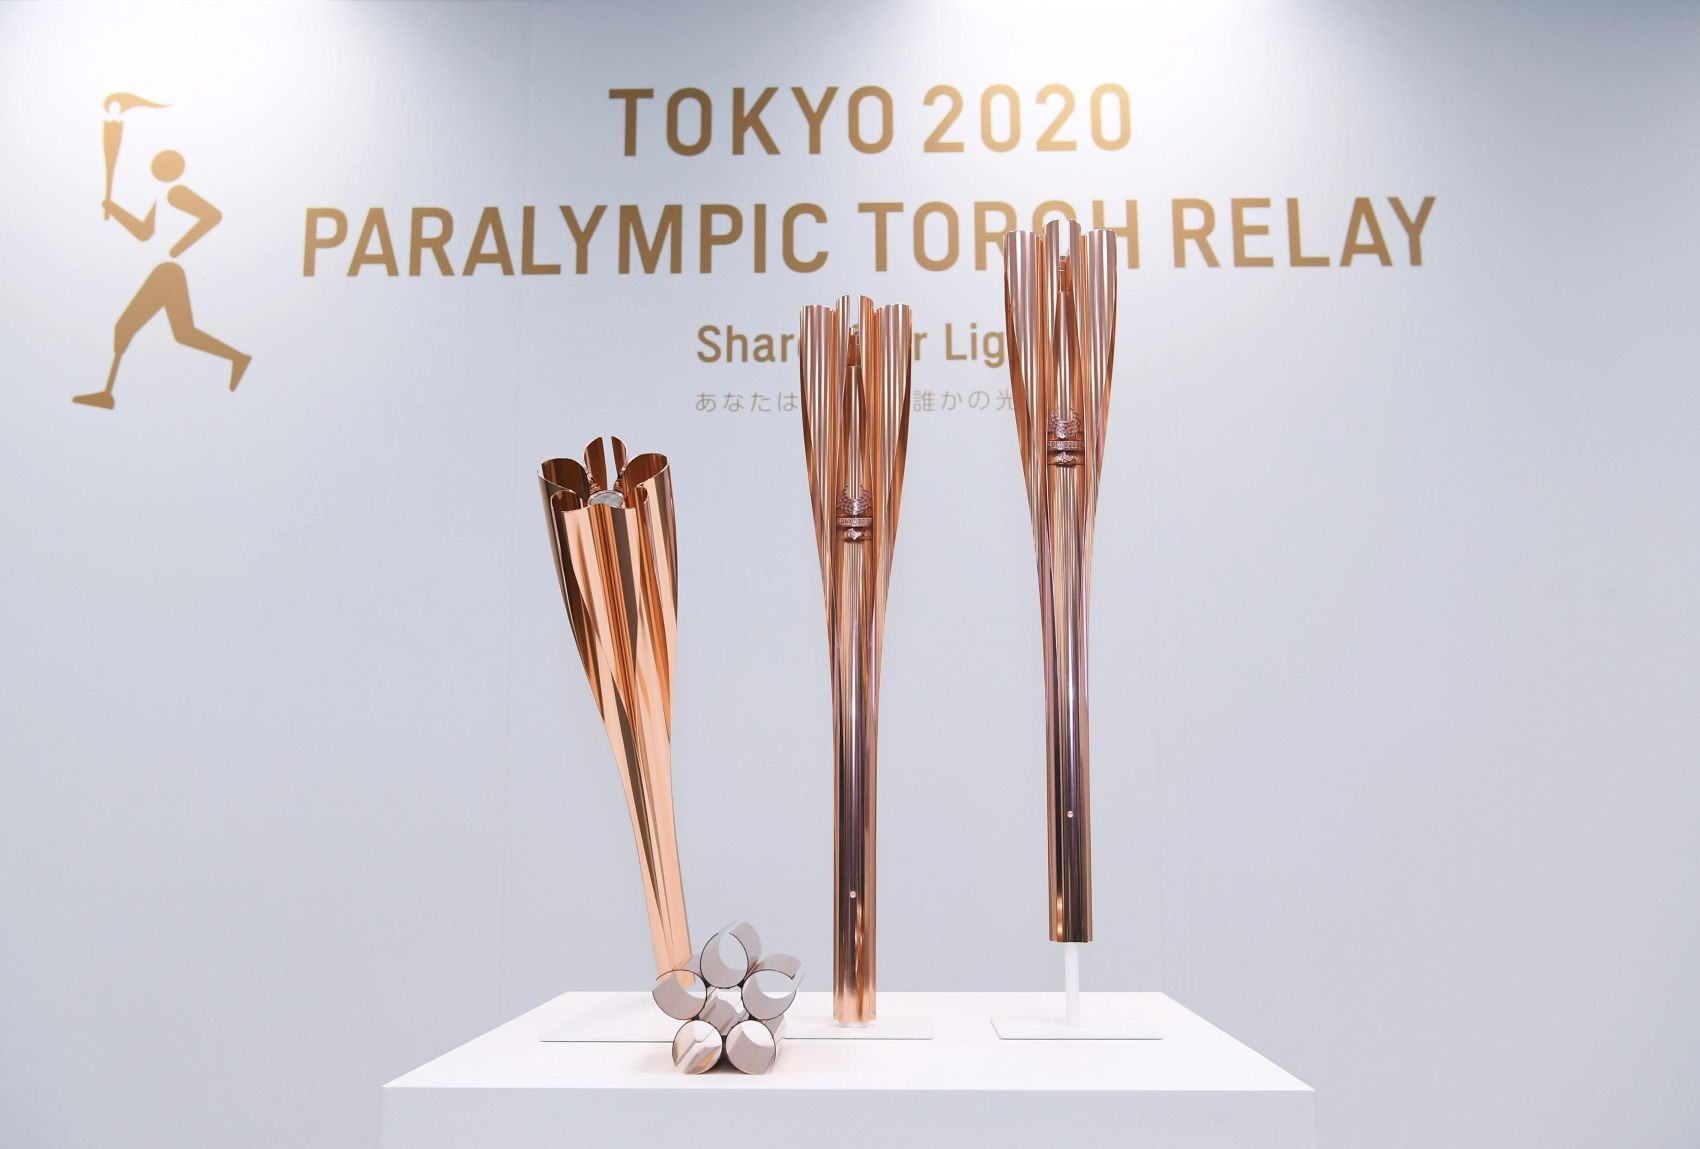 Stoke Mandeville will host a Paralympic Heritage Flame Lighting Ceremony for Tokyo 2020 ©Tokyo 2020